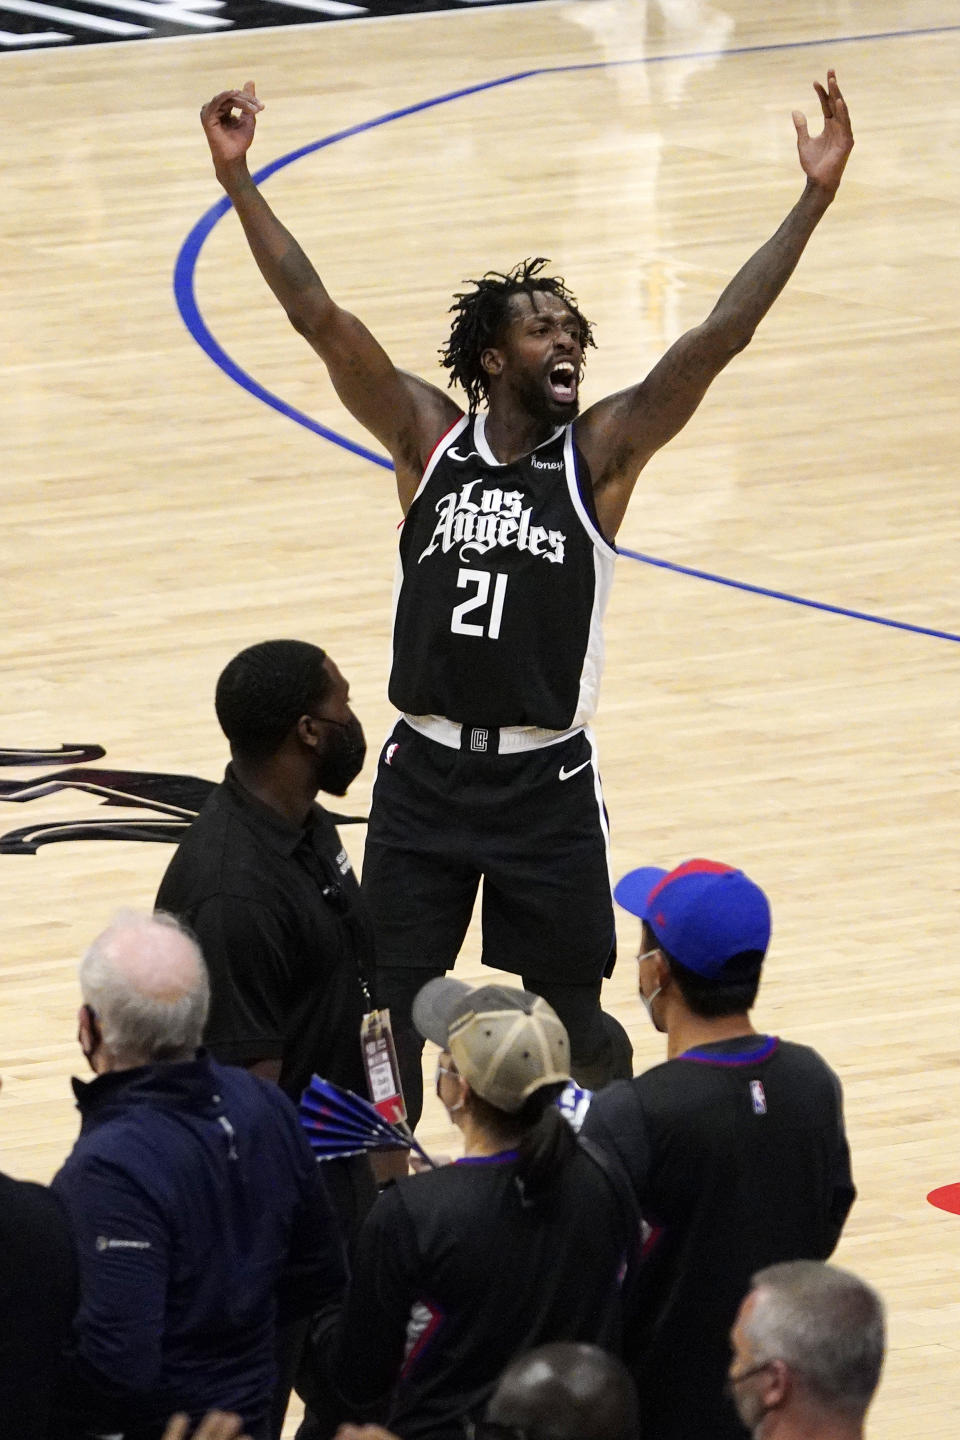 Los Angeles Clippers guard Patrick Beverley celebrates in the closing seconds during the second half in Game 6 of a second-round NBA basketball playoff series against the Utah Jazz Friday, June 18, 2021, in Los Angeles. (AP Photo/Mark J. Terrill)